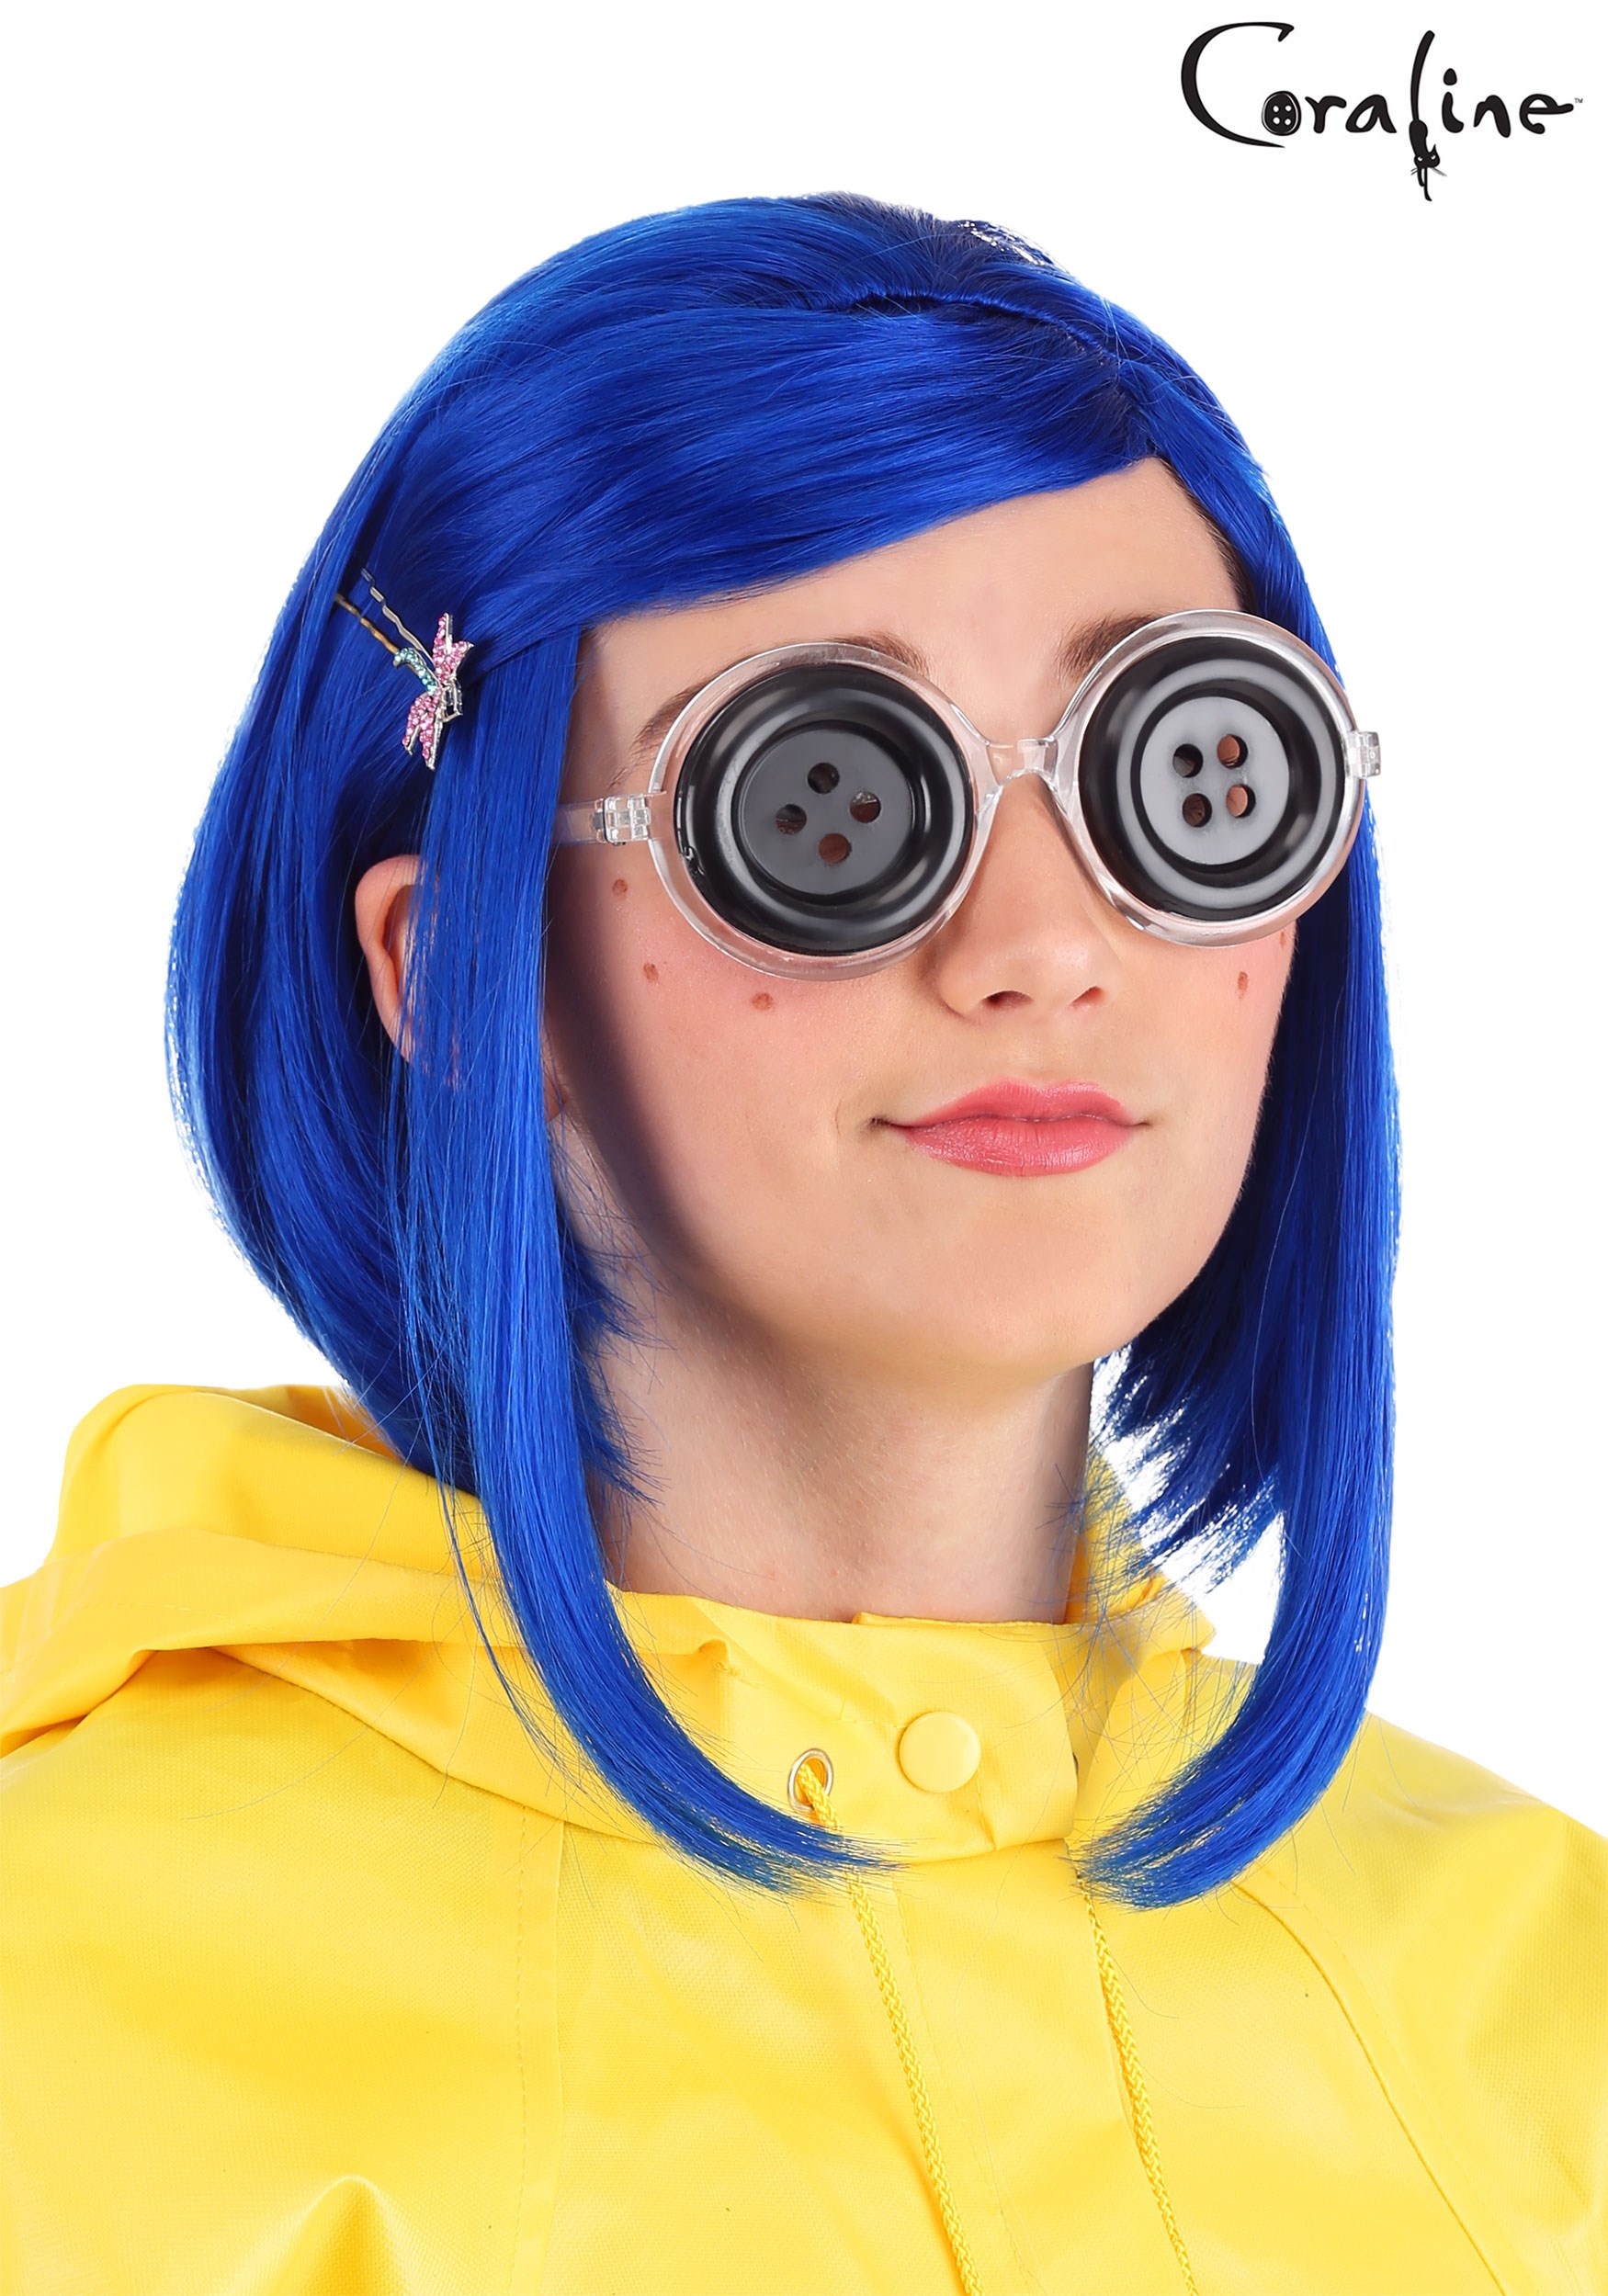 C-ZOFEK Coraline Cosplay Props Button Eyewear Glasses for Other Mother Cosplay 